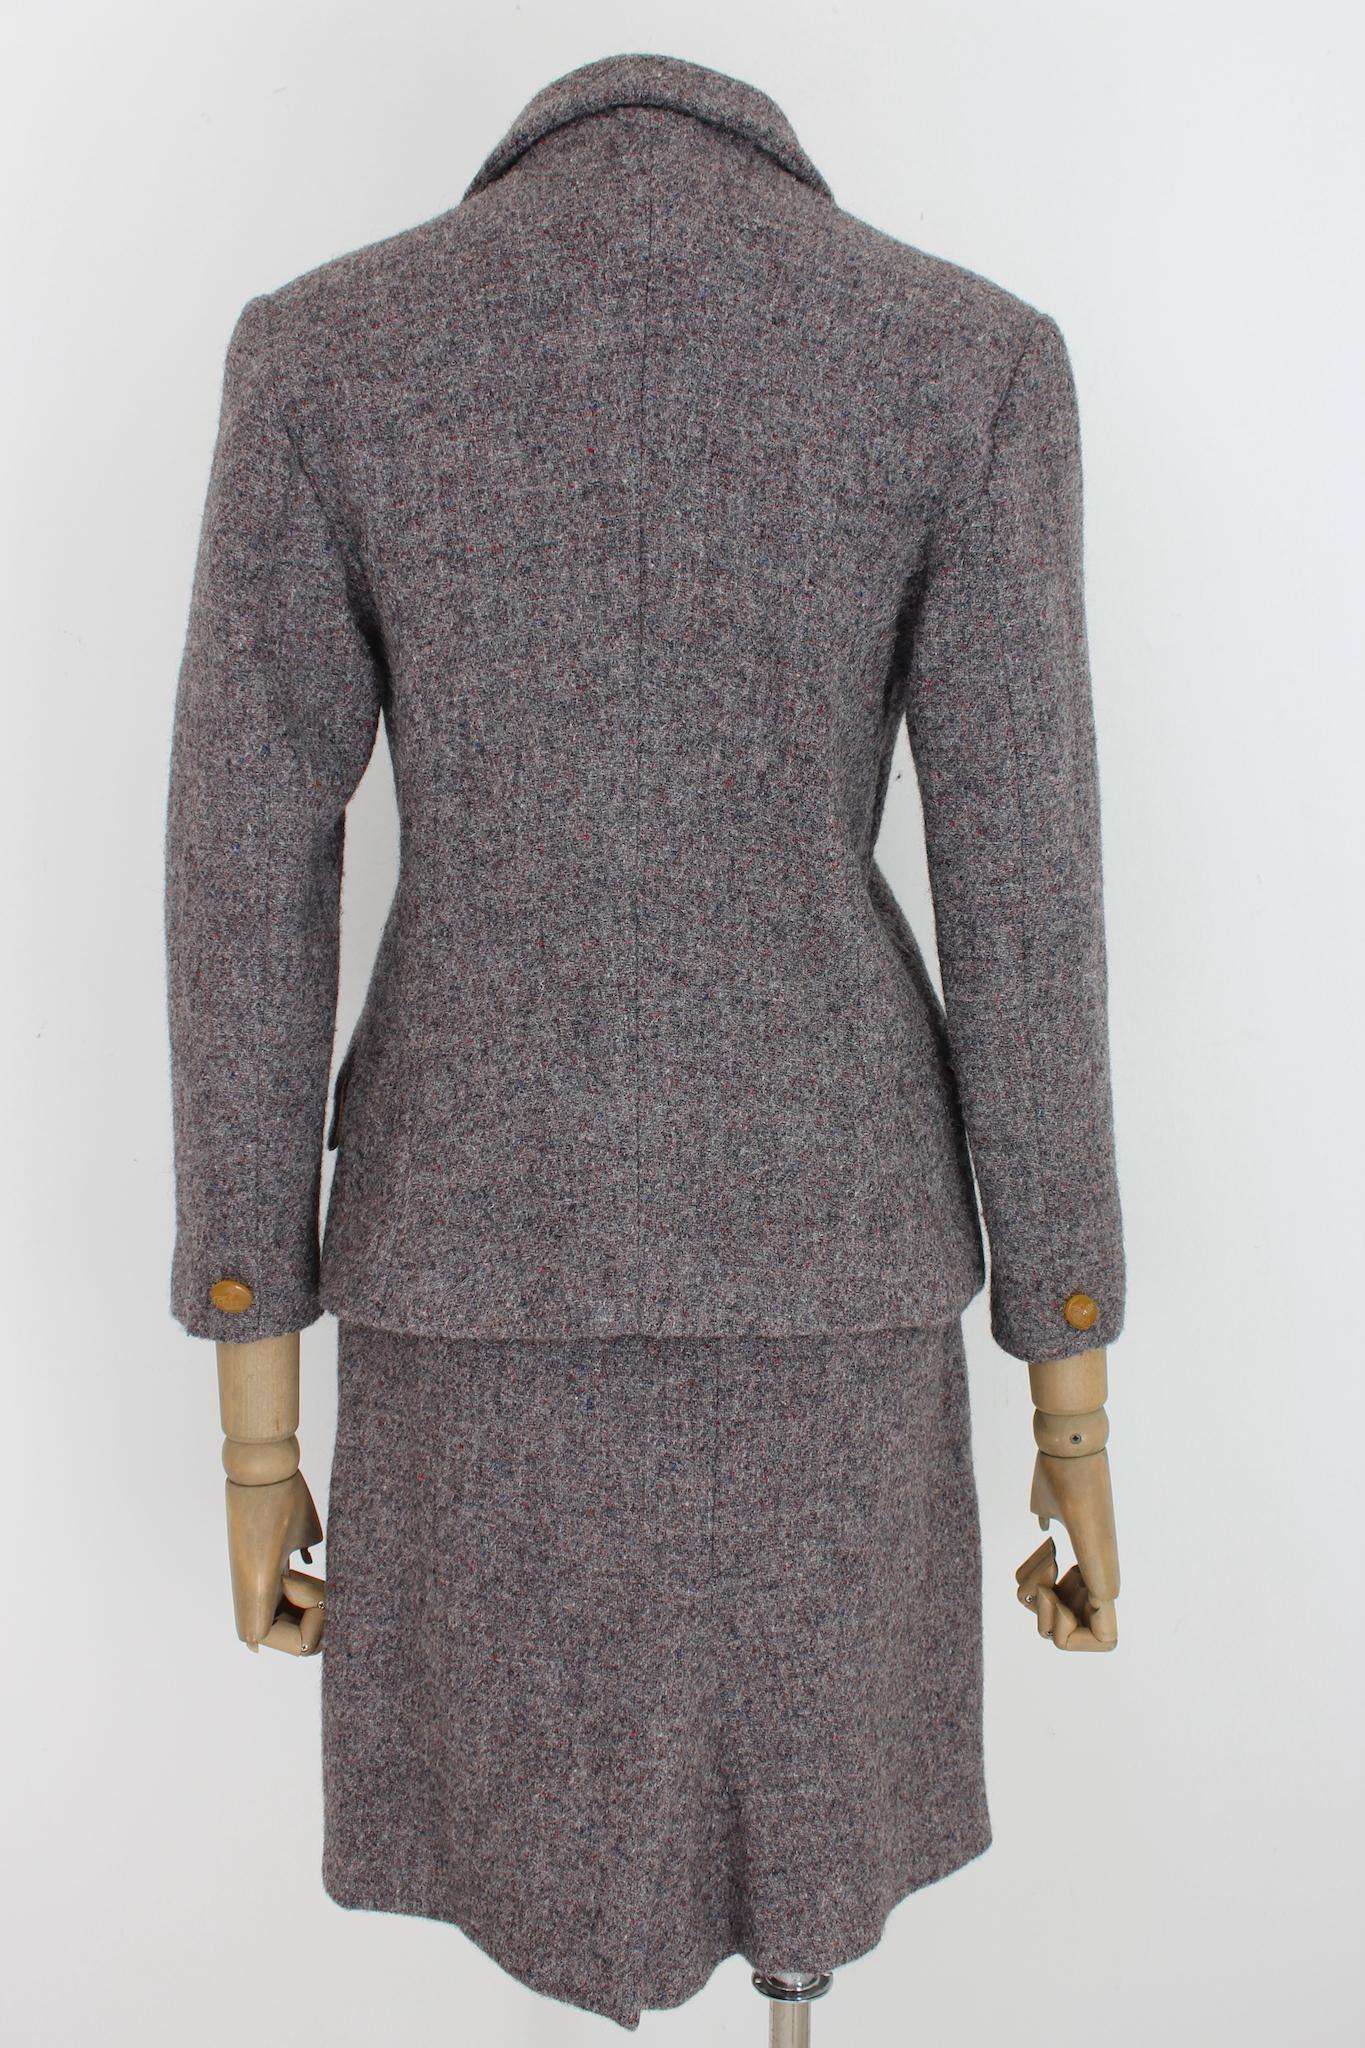 Vivienne Westwood classic 90s vintage skirt suit. Gray color in red and blue tweed fabric, 100% wool, internally lined. Closure with logoed buttons. Made in Italy.

Size: 46 It 12 Us 14 Uk

Shoulder: 44 cm
Bust / Chest: 45 cm
Sleeve: 55 cm
Length: